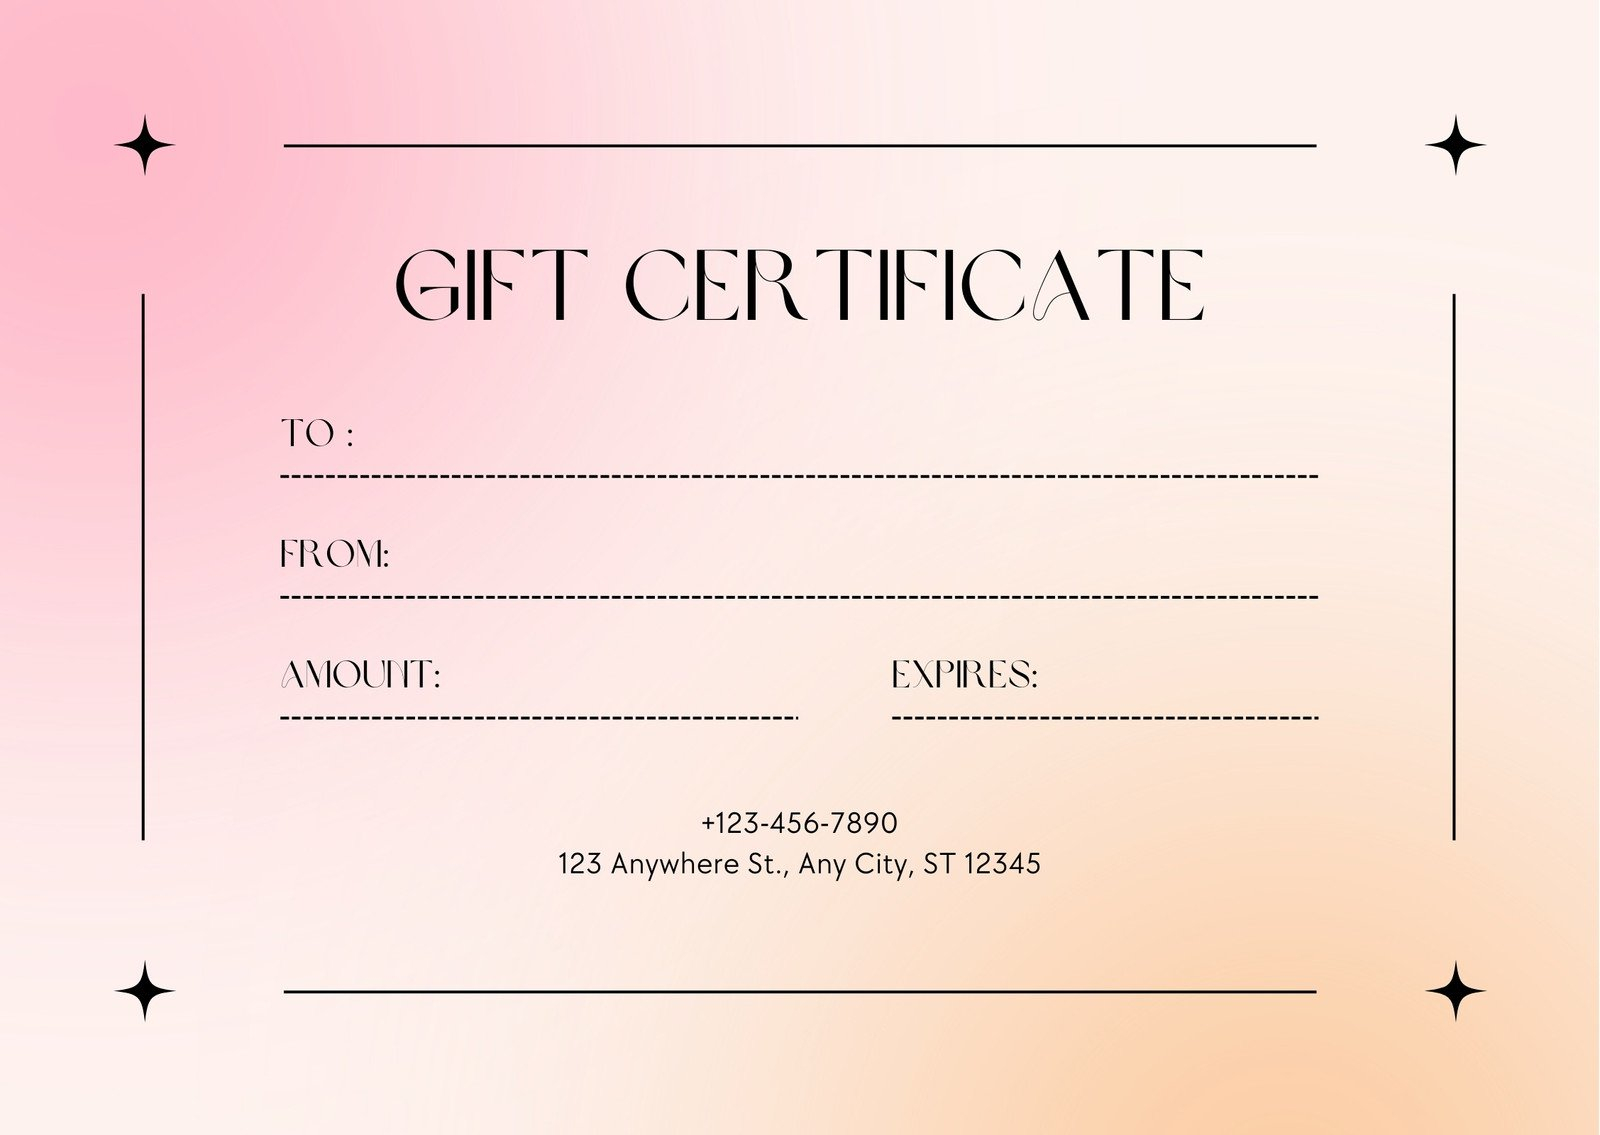 Custom Gift Certificates - Personalize and Order Prints Now Regarding Custom Gift Certificate Template